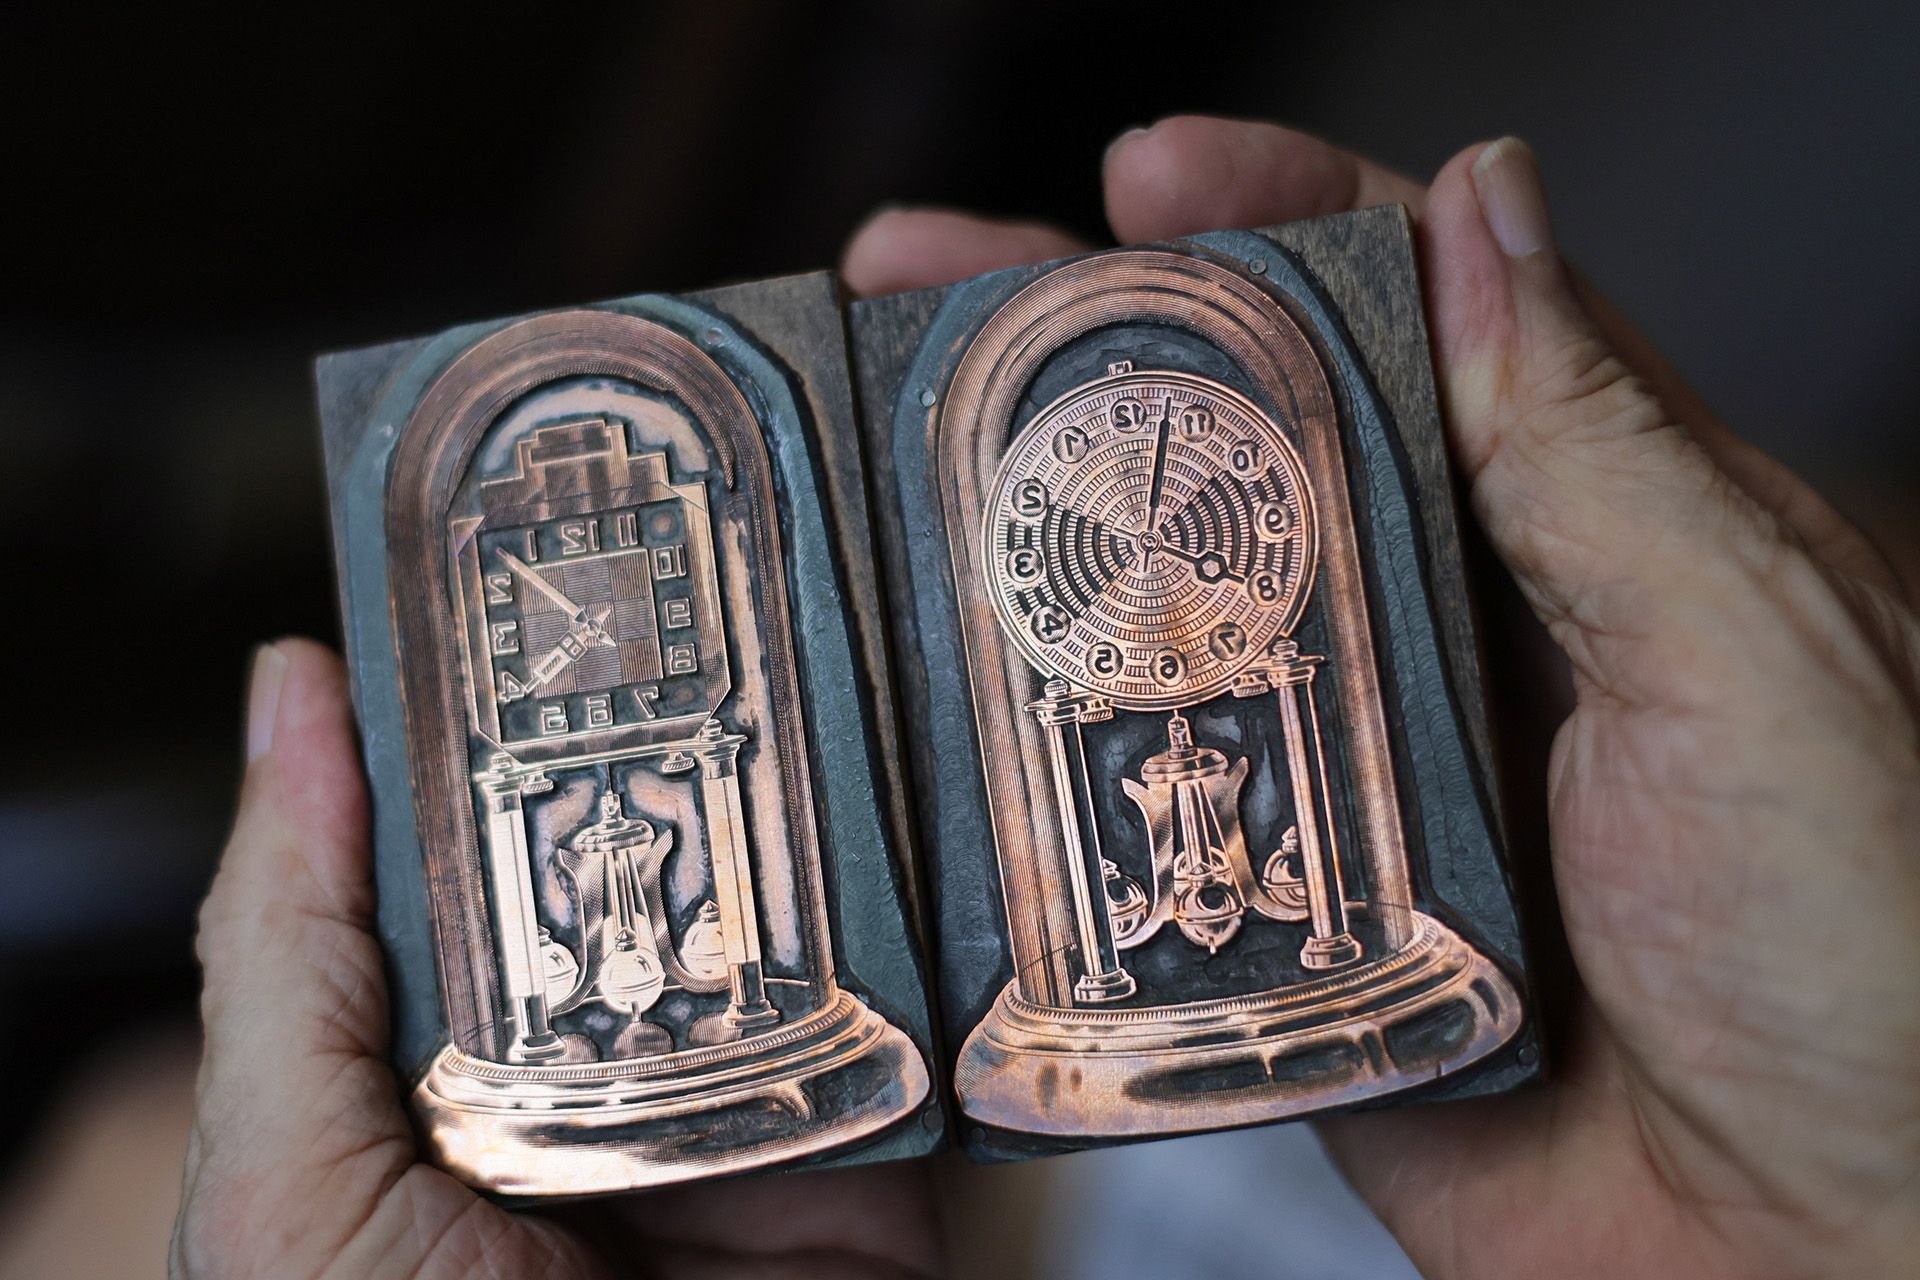 Engraved metal blocks of 400-day clocks were used for advertisement or book illustrations. Mr Mun has collected seven printing blocks since the early 1990s.